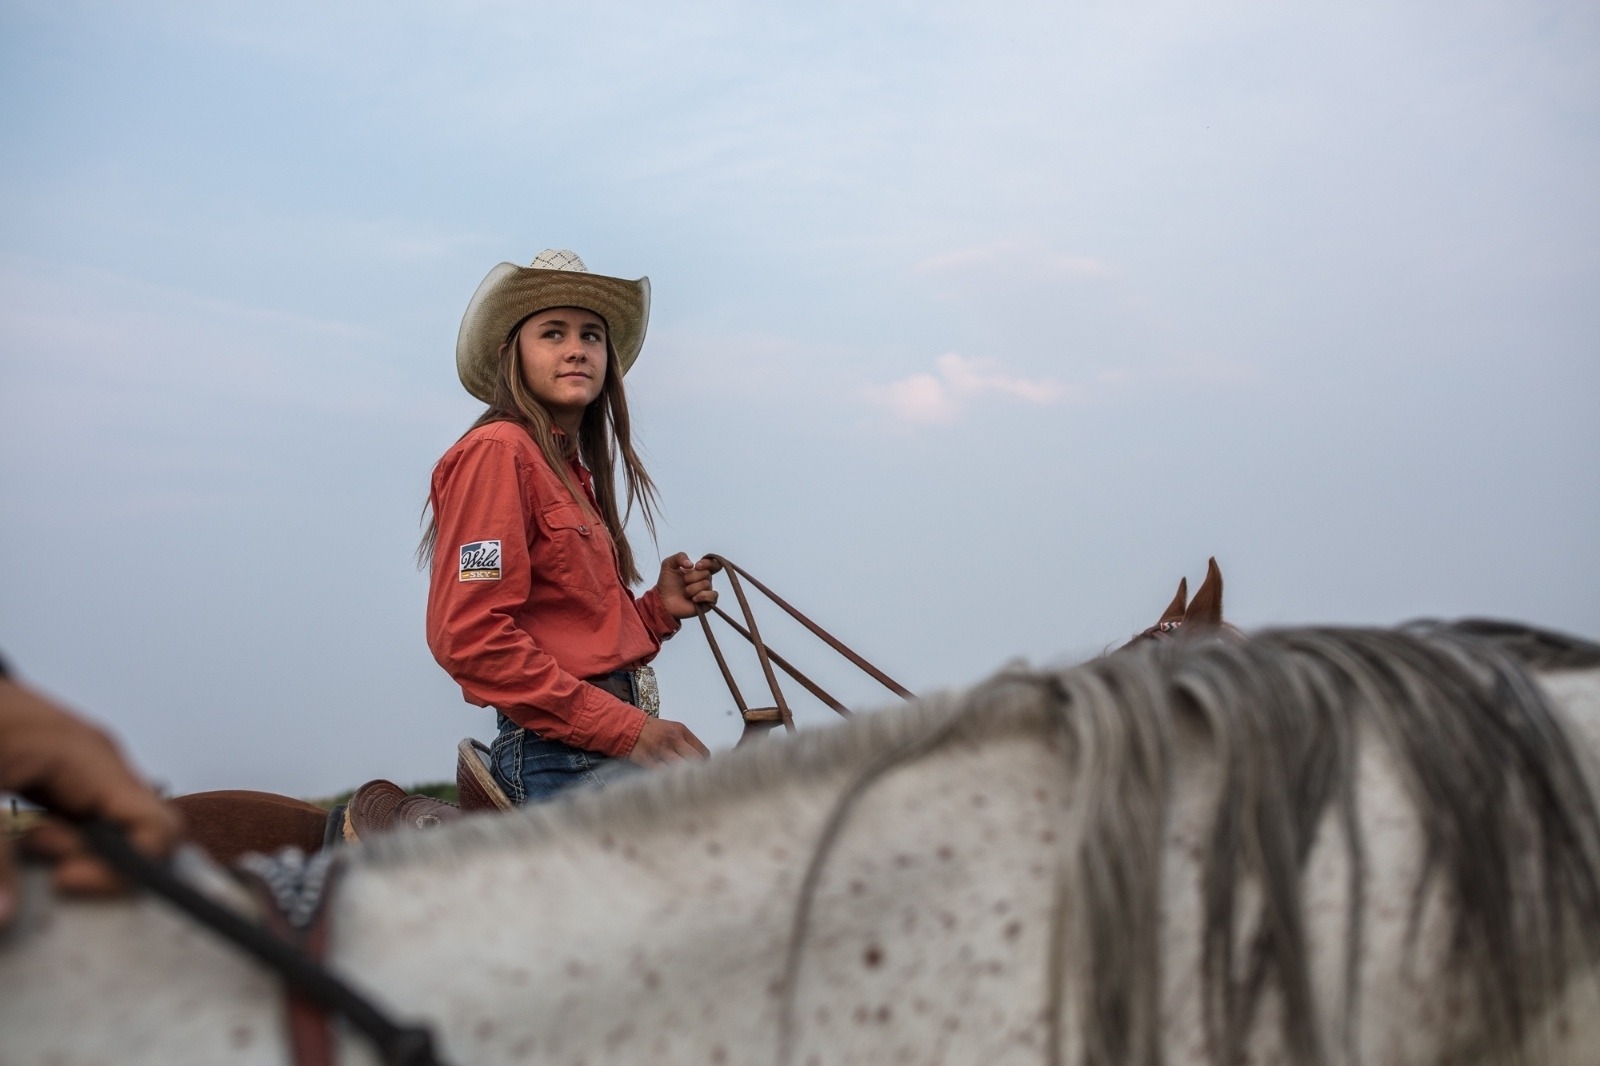 Irene Johnson rides with her sister Sadie as they exercise their horses the evening before their first rodeo of the season. Photo by Louise Johns